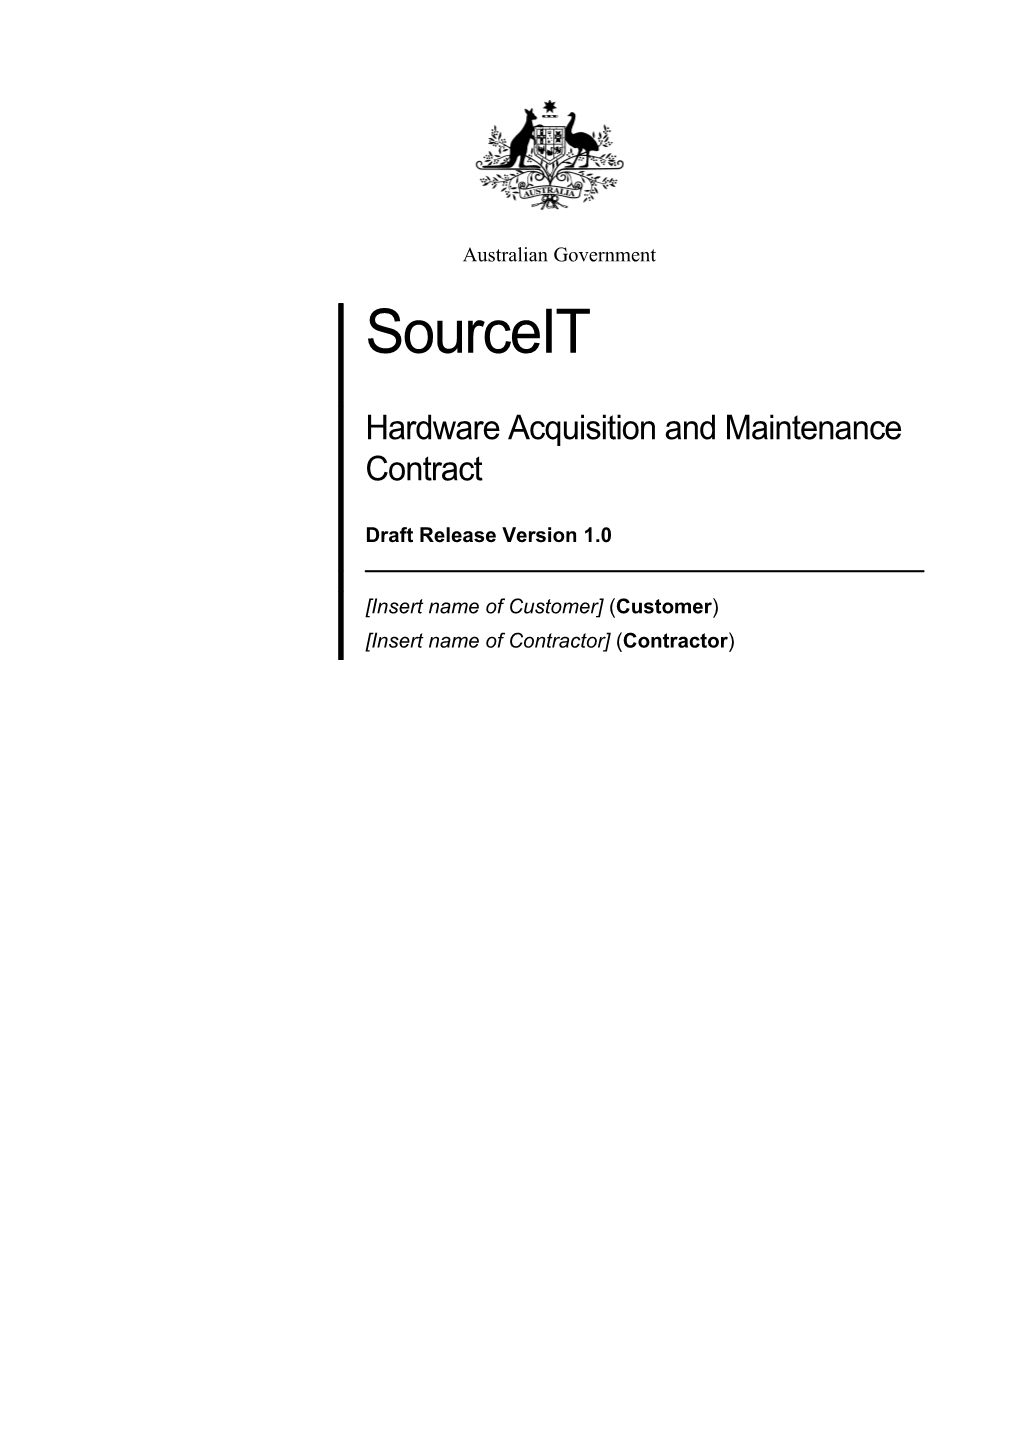 Hardware Acquisition and Maintenance Contract